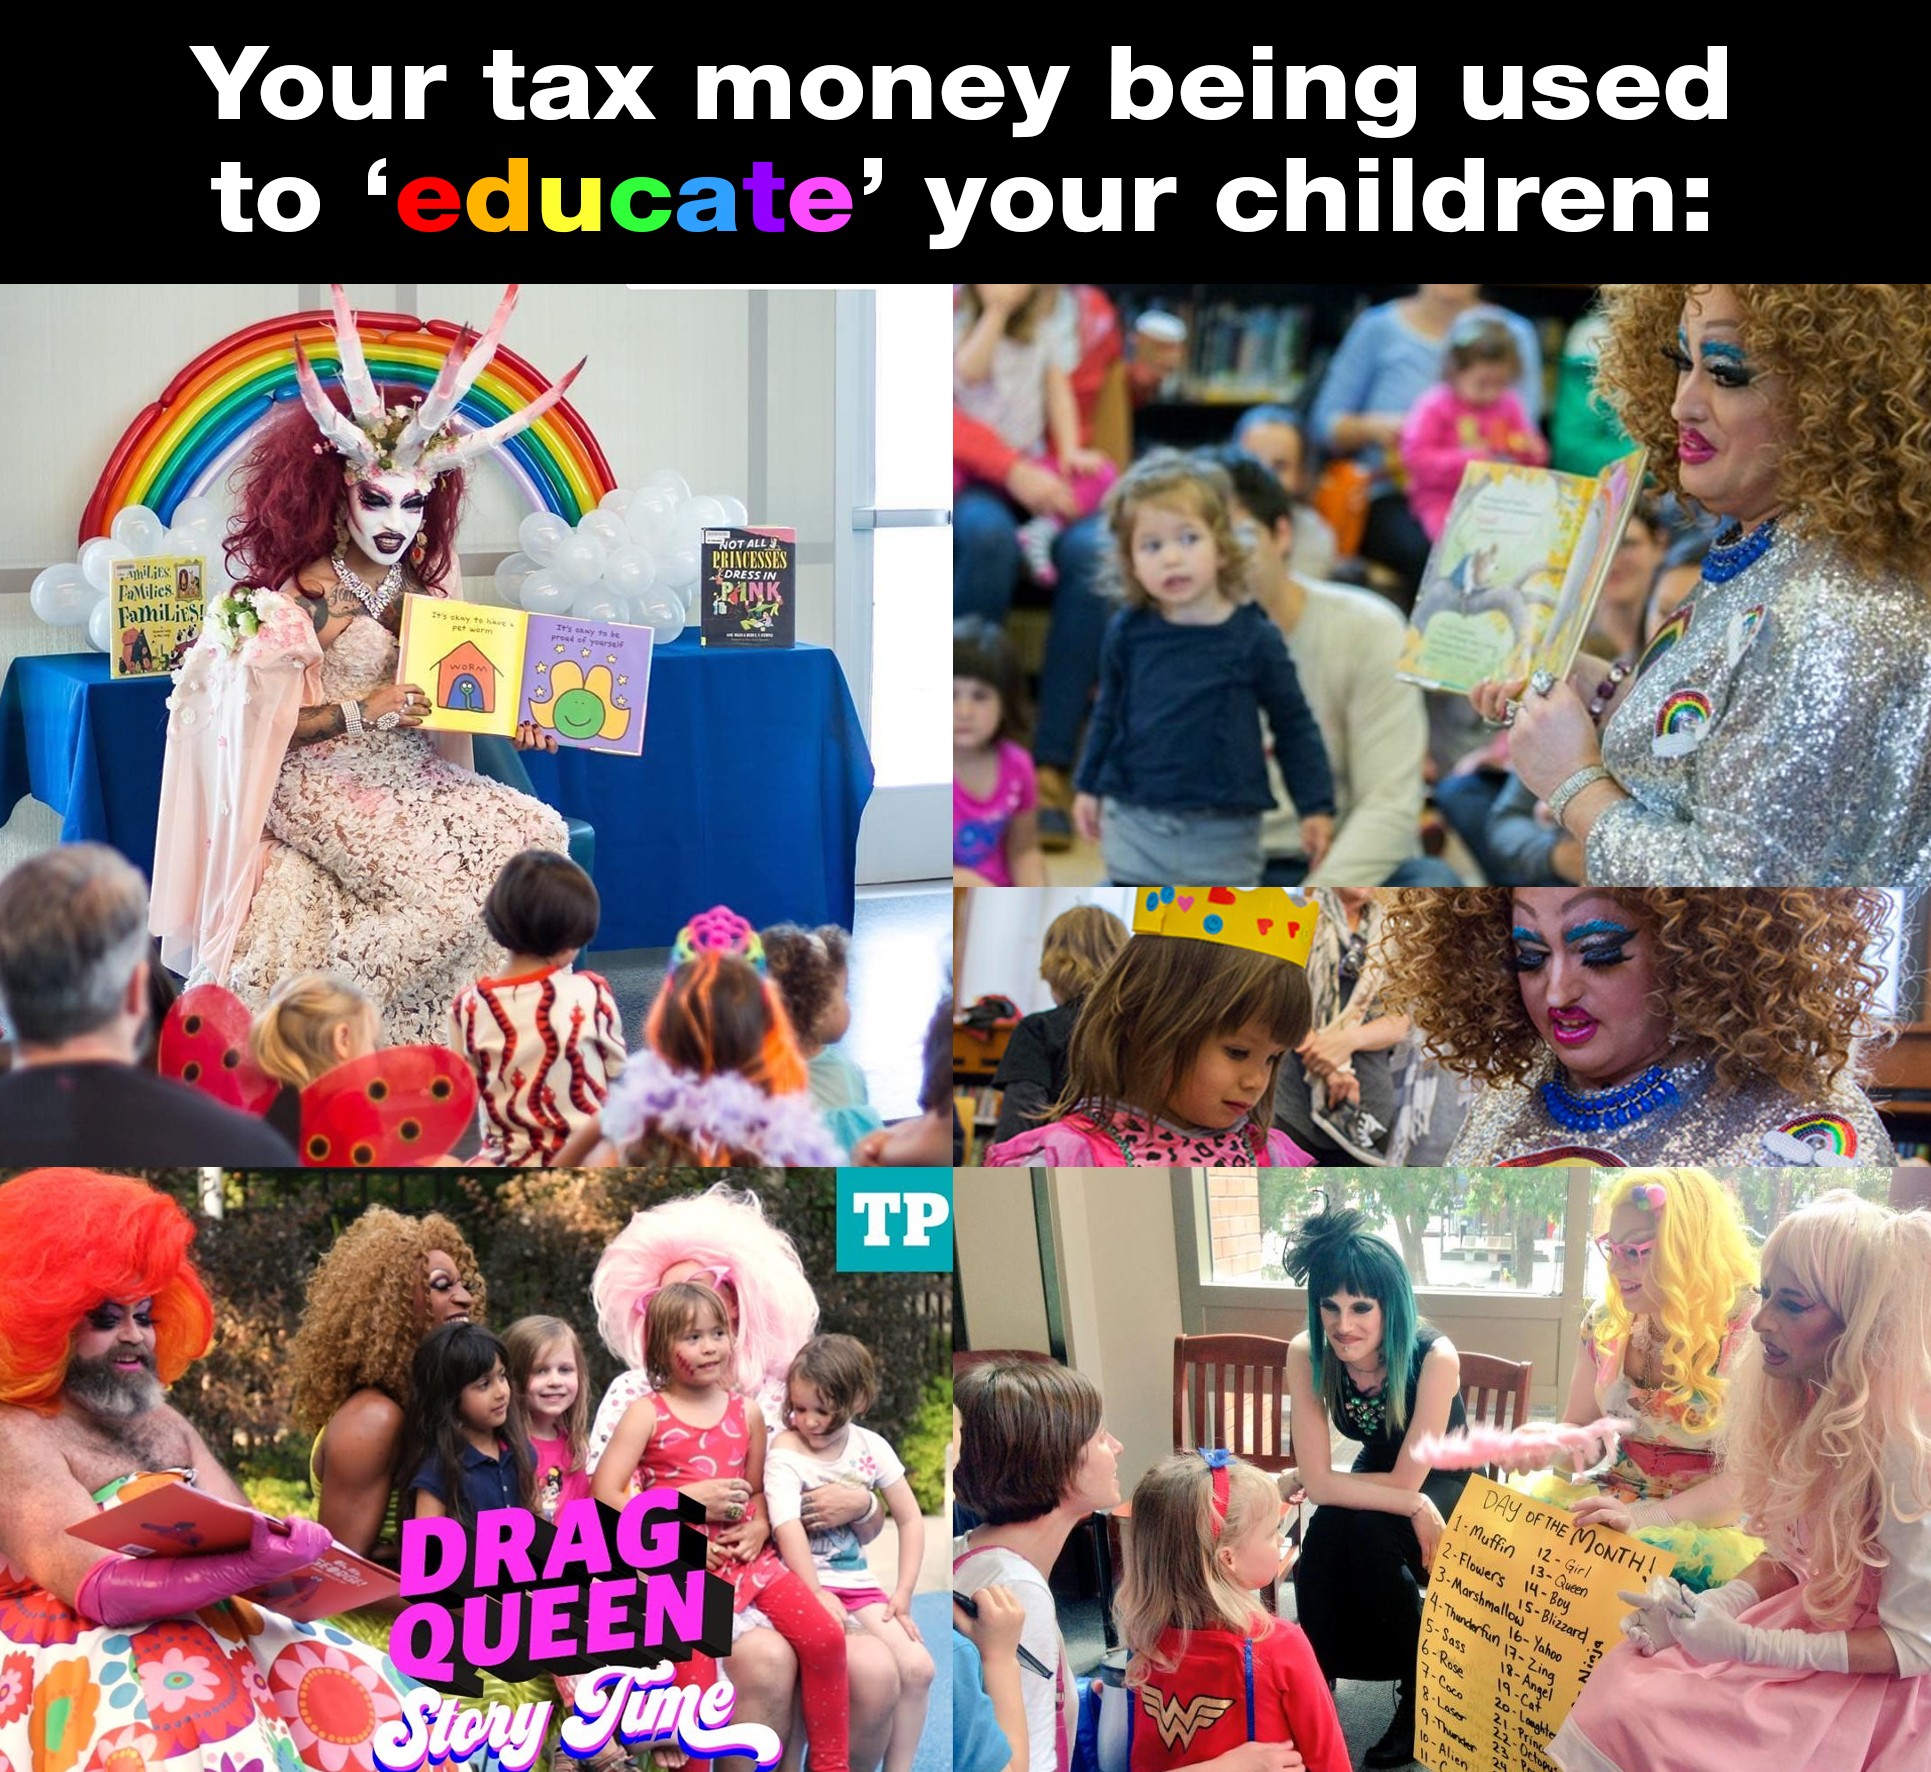 toy - Your tax money being used to 'educate' your children Tp Drag Queen Jrow Tune